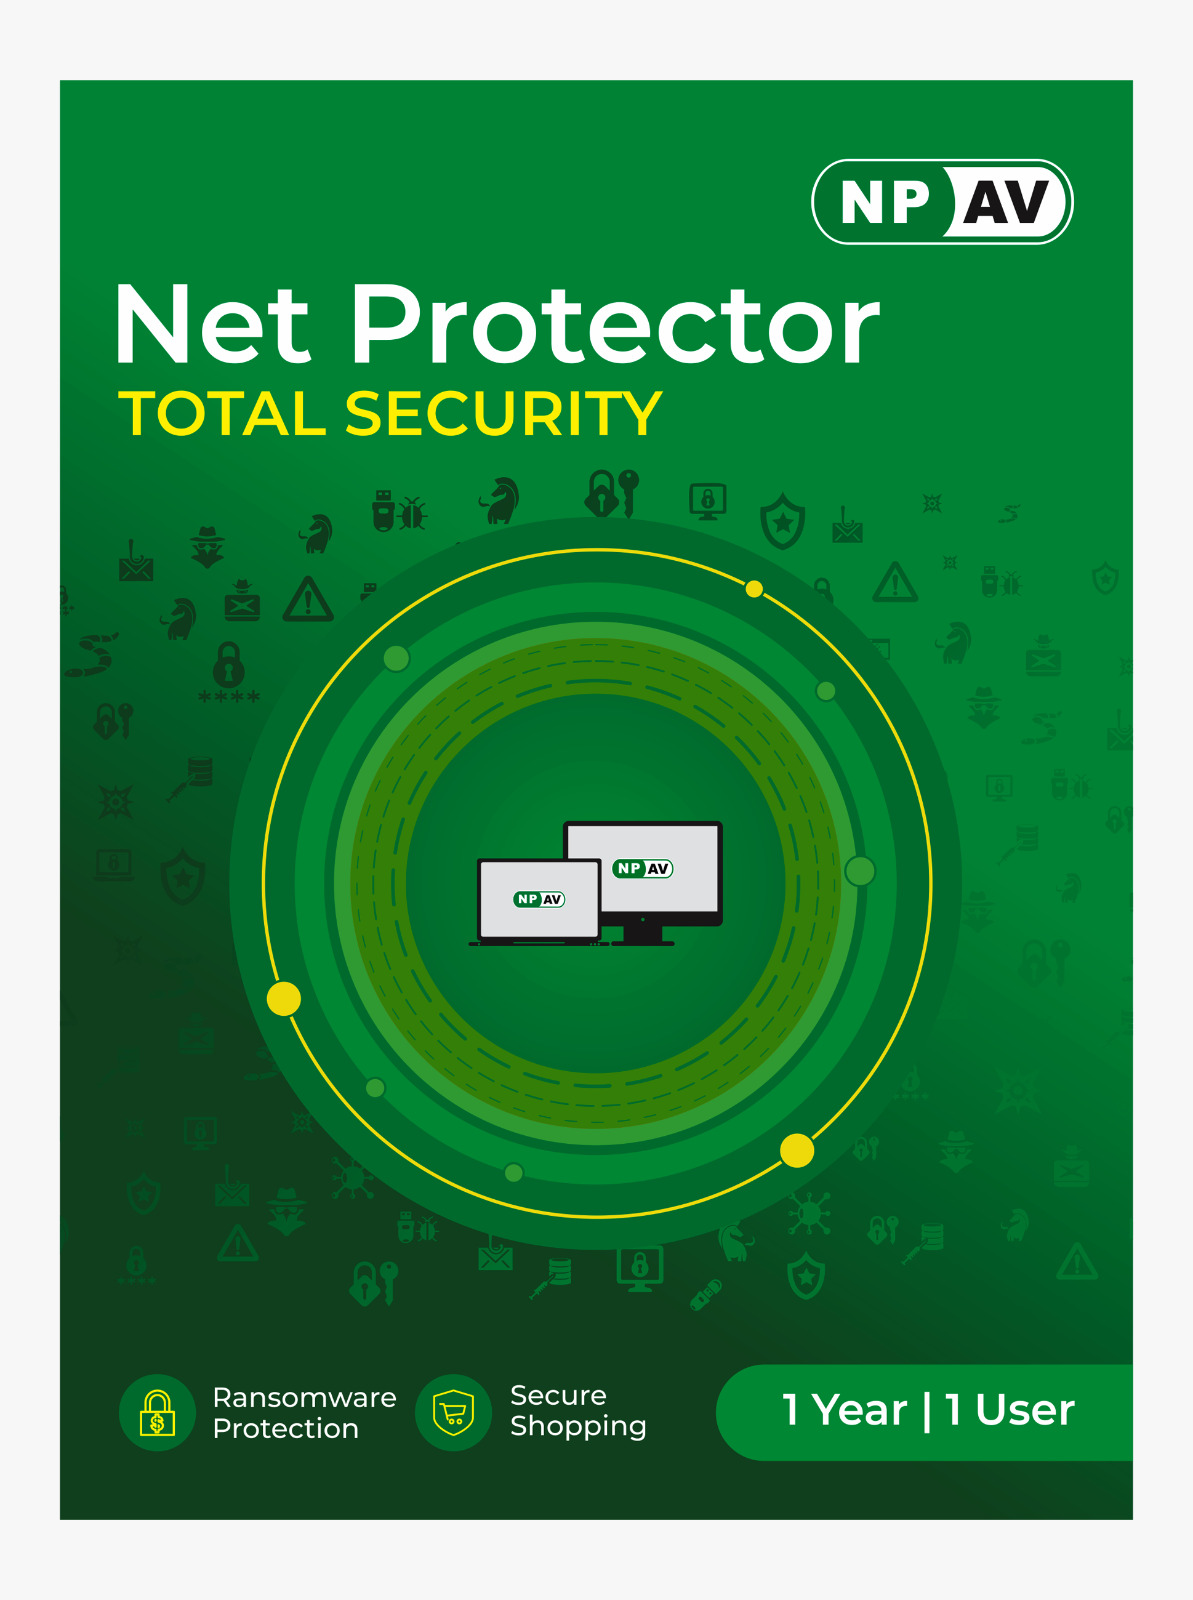 NP TOTAL SECURITY
1 USER 1 YEAR